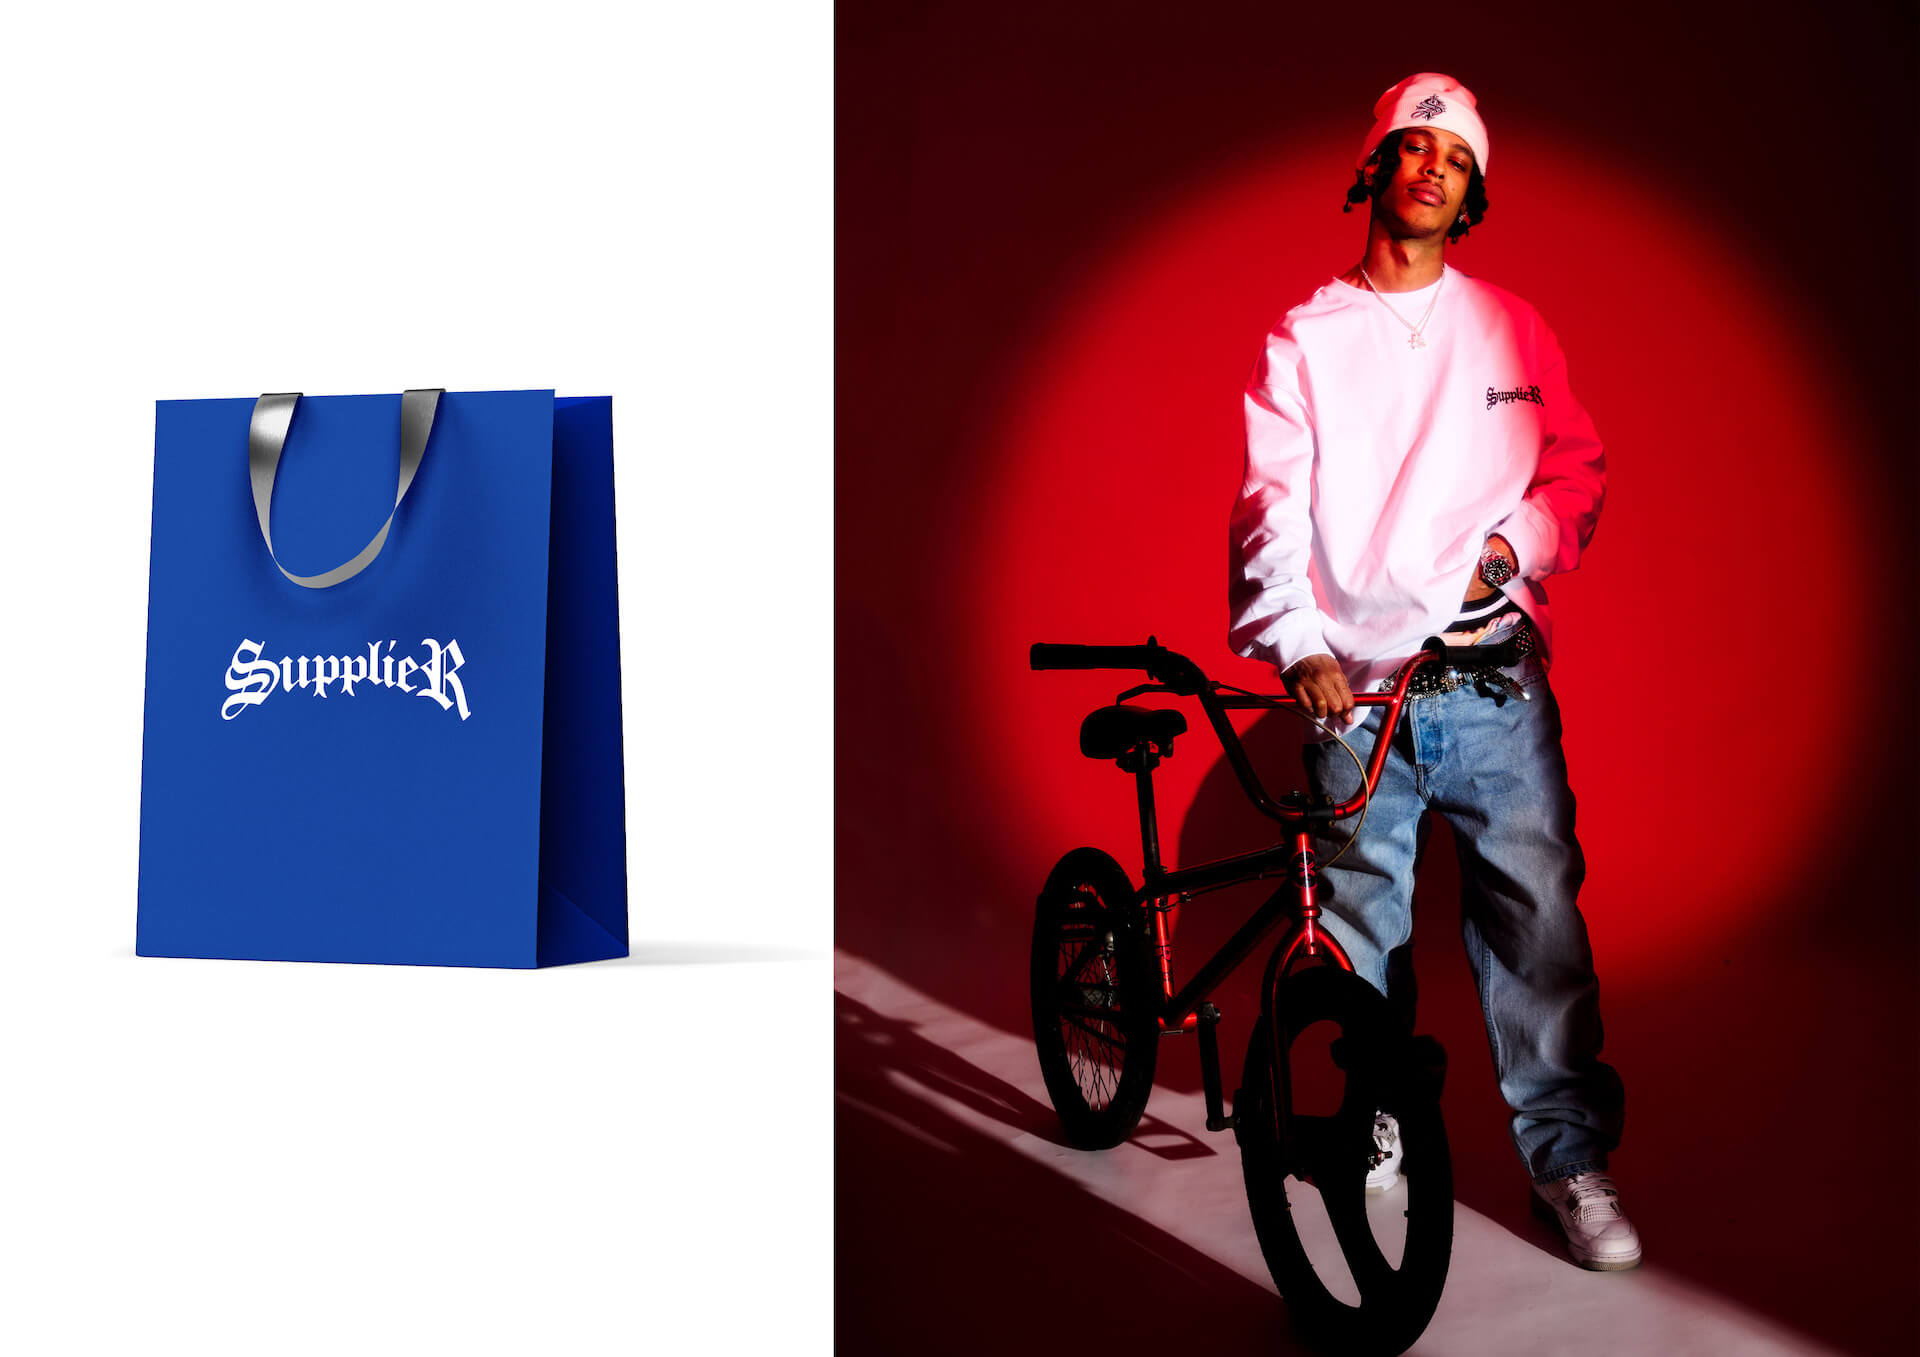 SUPPLIERのPOP UP STOREがatmosで開催｜「CROSS LOGO COLLECTION」のアイテムが詰まったLIMITED BOXが数量限定で発売 life_220413_supplier-220415_05